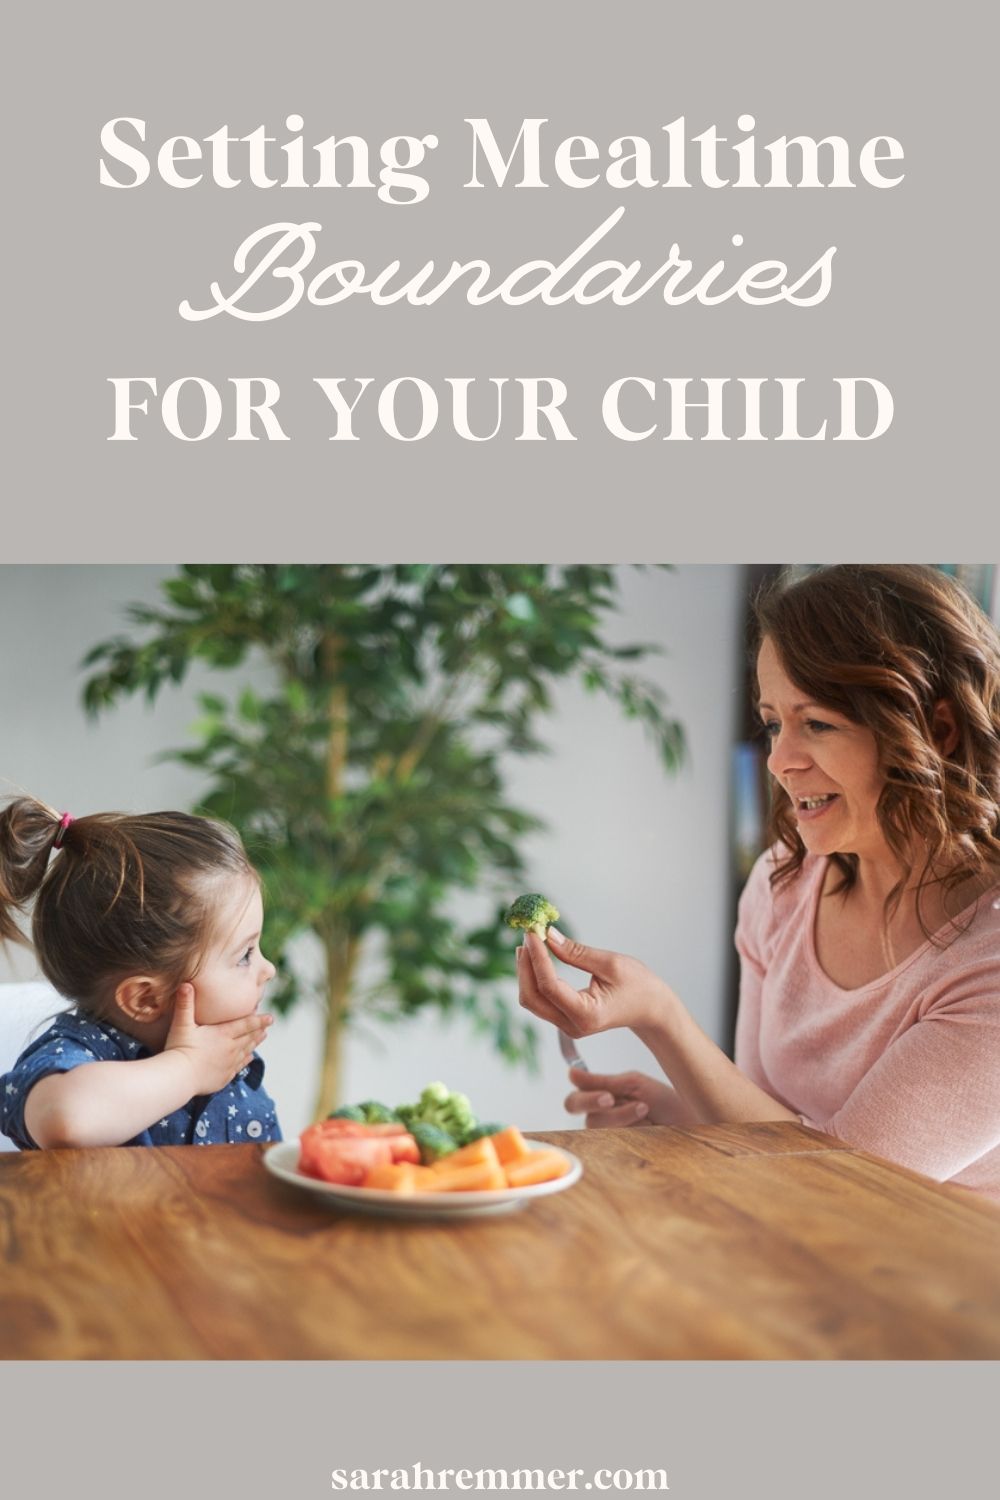 Setting Mealtime Boundaries for your Child